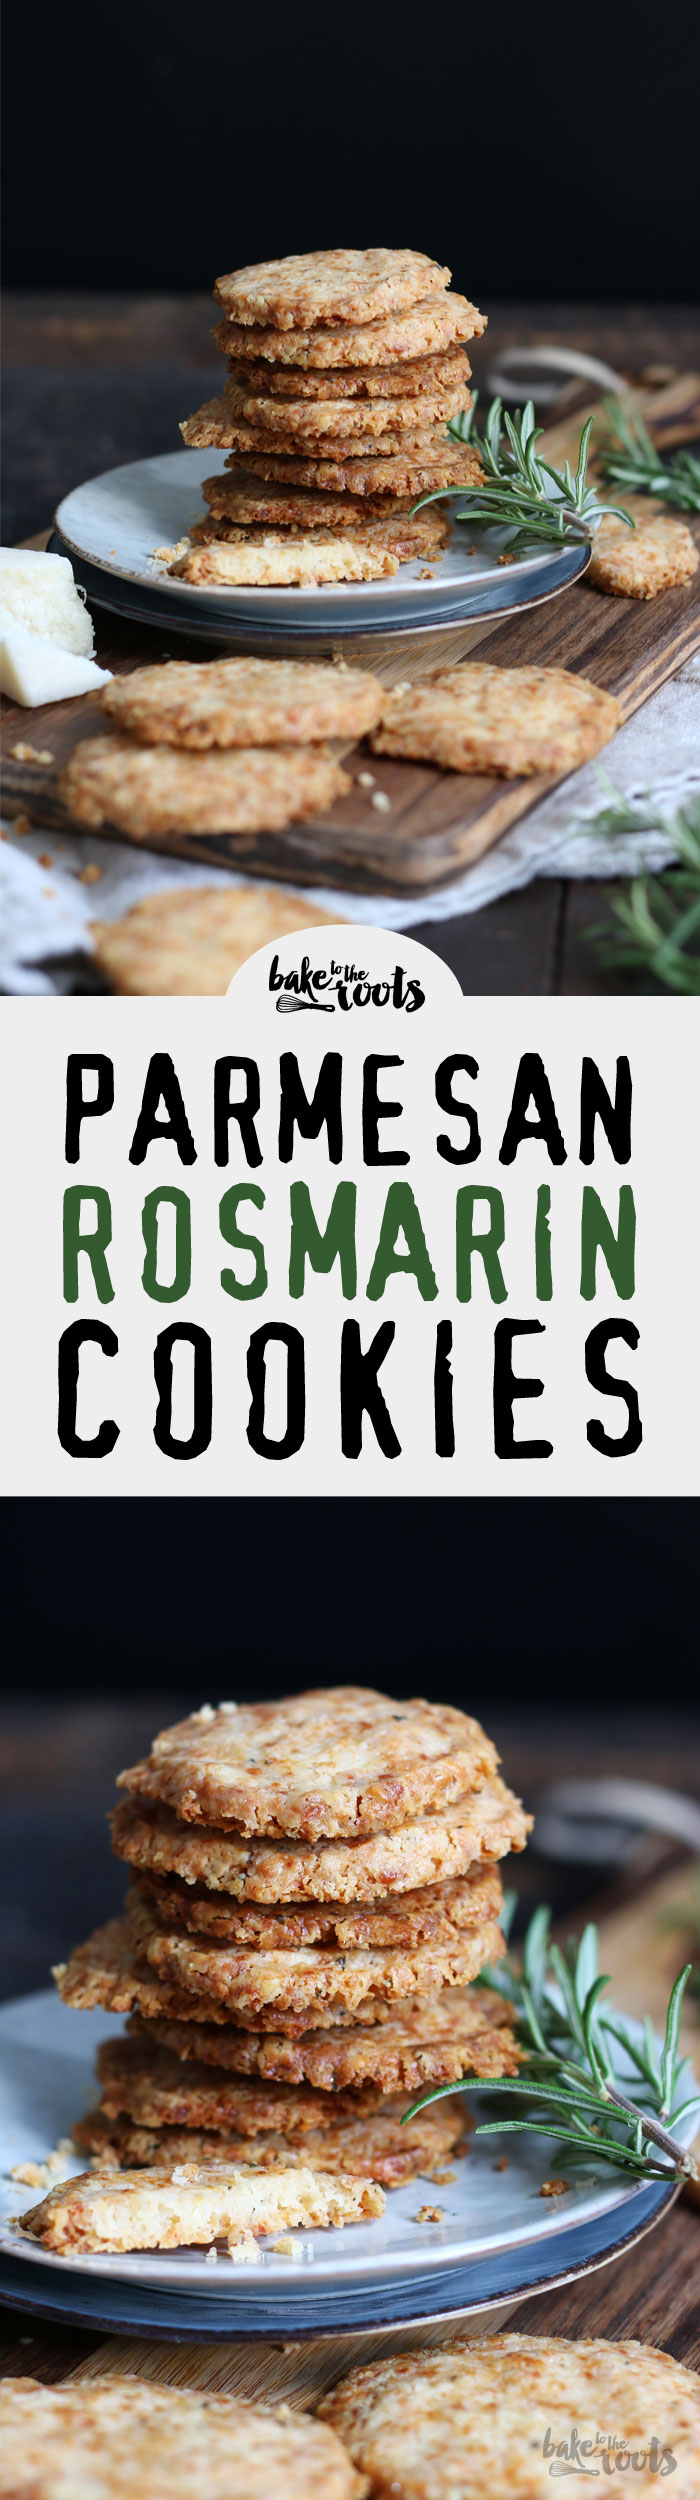 My favorite cookies when it comes to savory cookies - Parmesan Rosemary Cookies | Bake to the roots